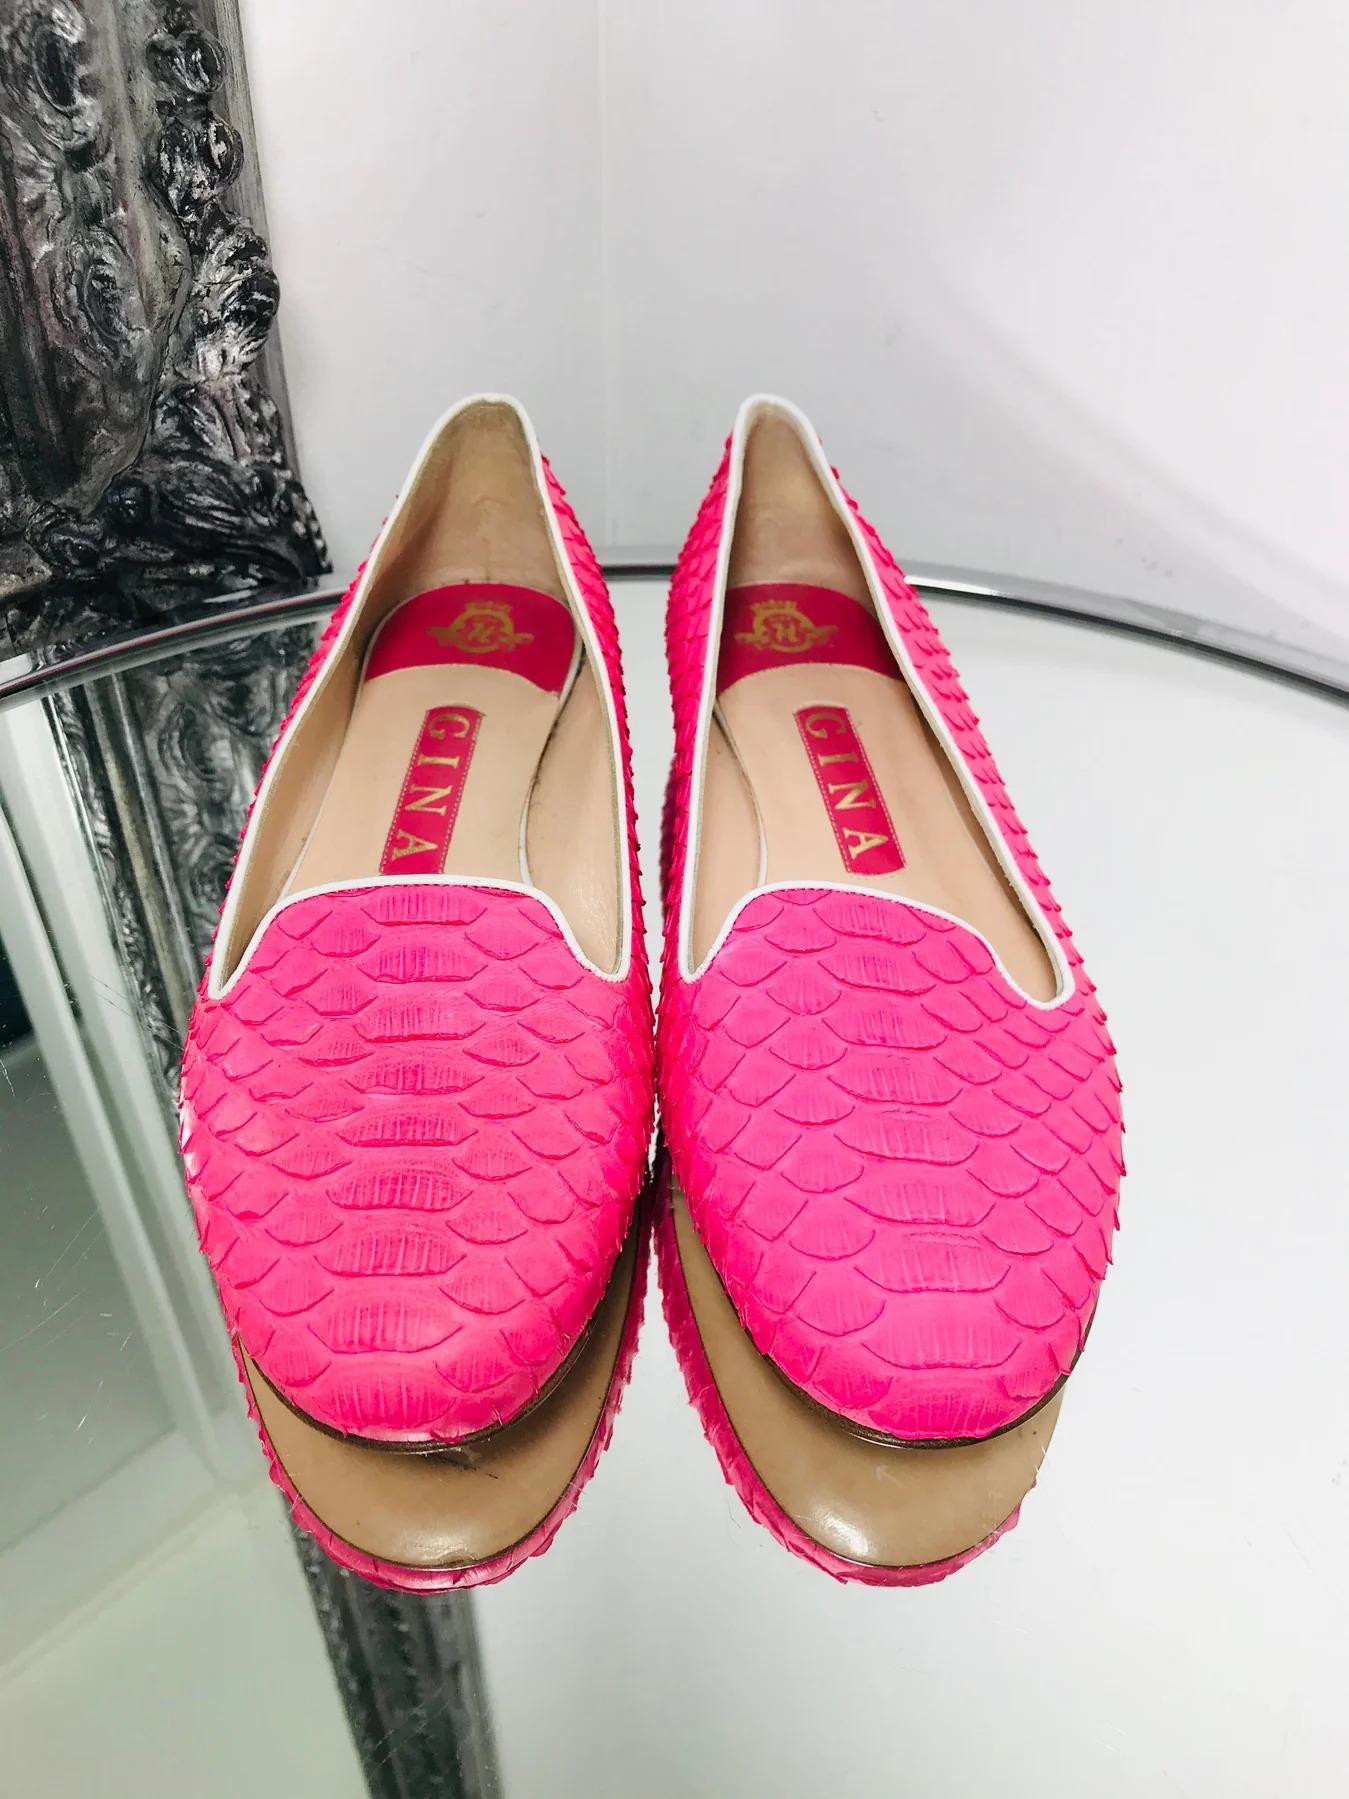 Gina Python Skin Flats

Bright pink ballet style flat shoes with contrasting white trim and almond toe with leather insole.

Additional information:
Size – 37
Composition - Snake Skin 
Condition – Very Good/Excellent
Comes with- Shoes Only